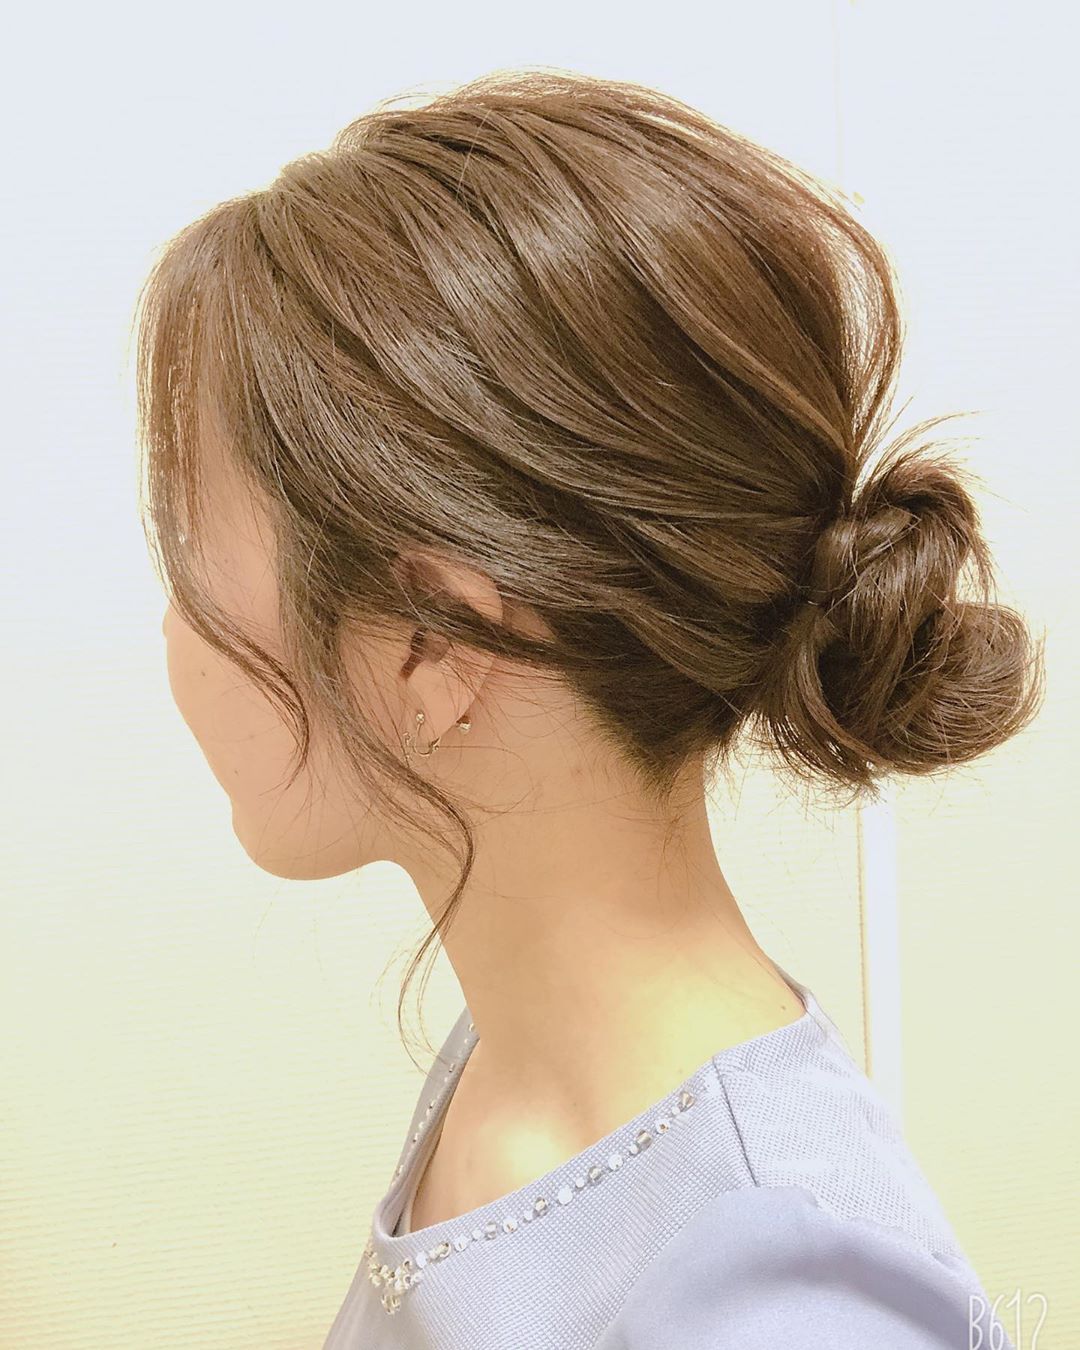 japanese hairstyles - textured messy bun with long side fringe side view